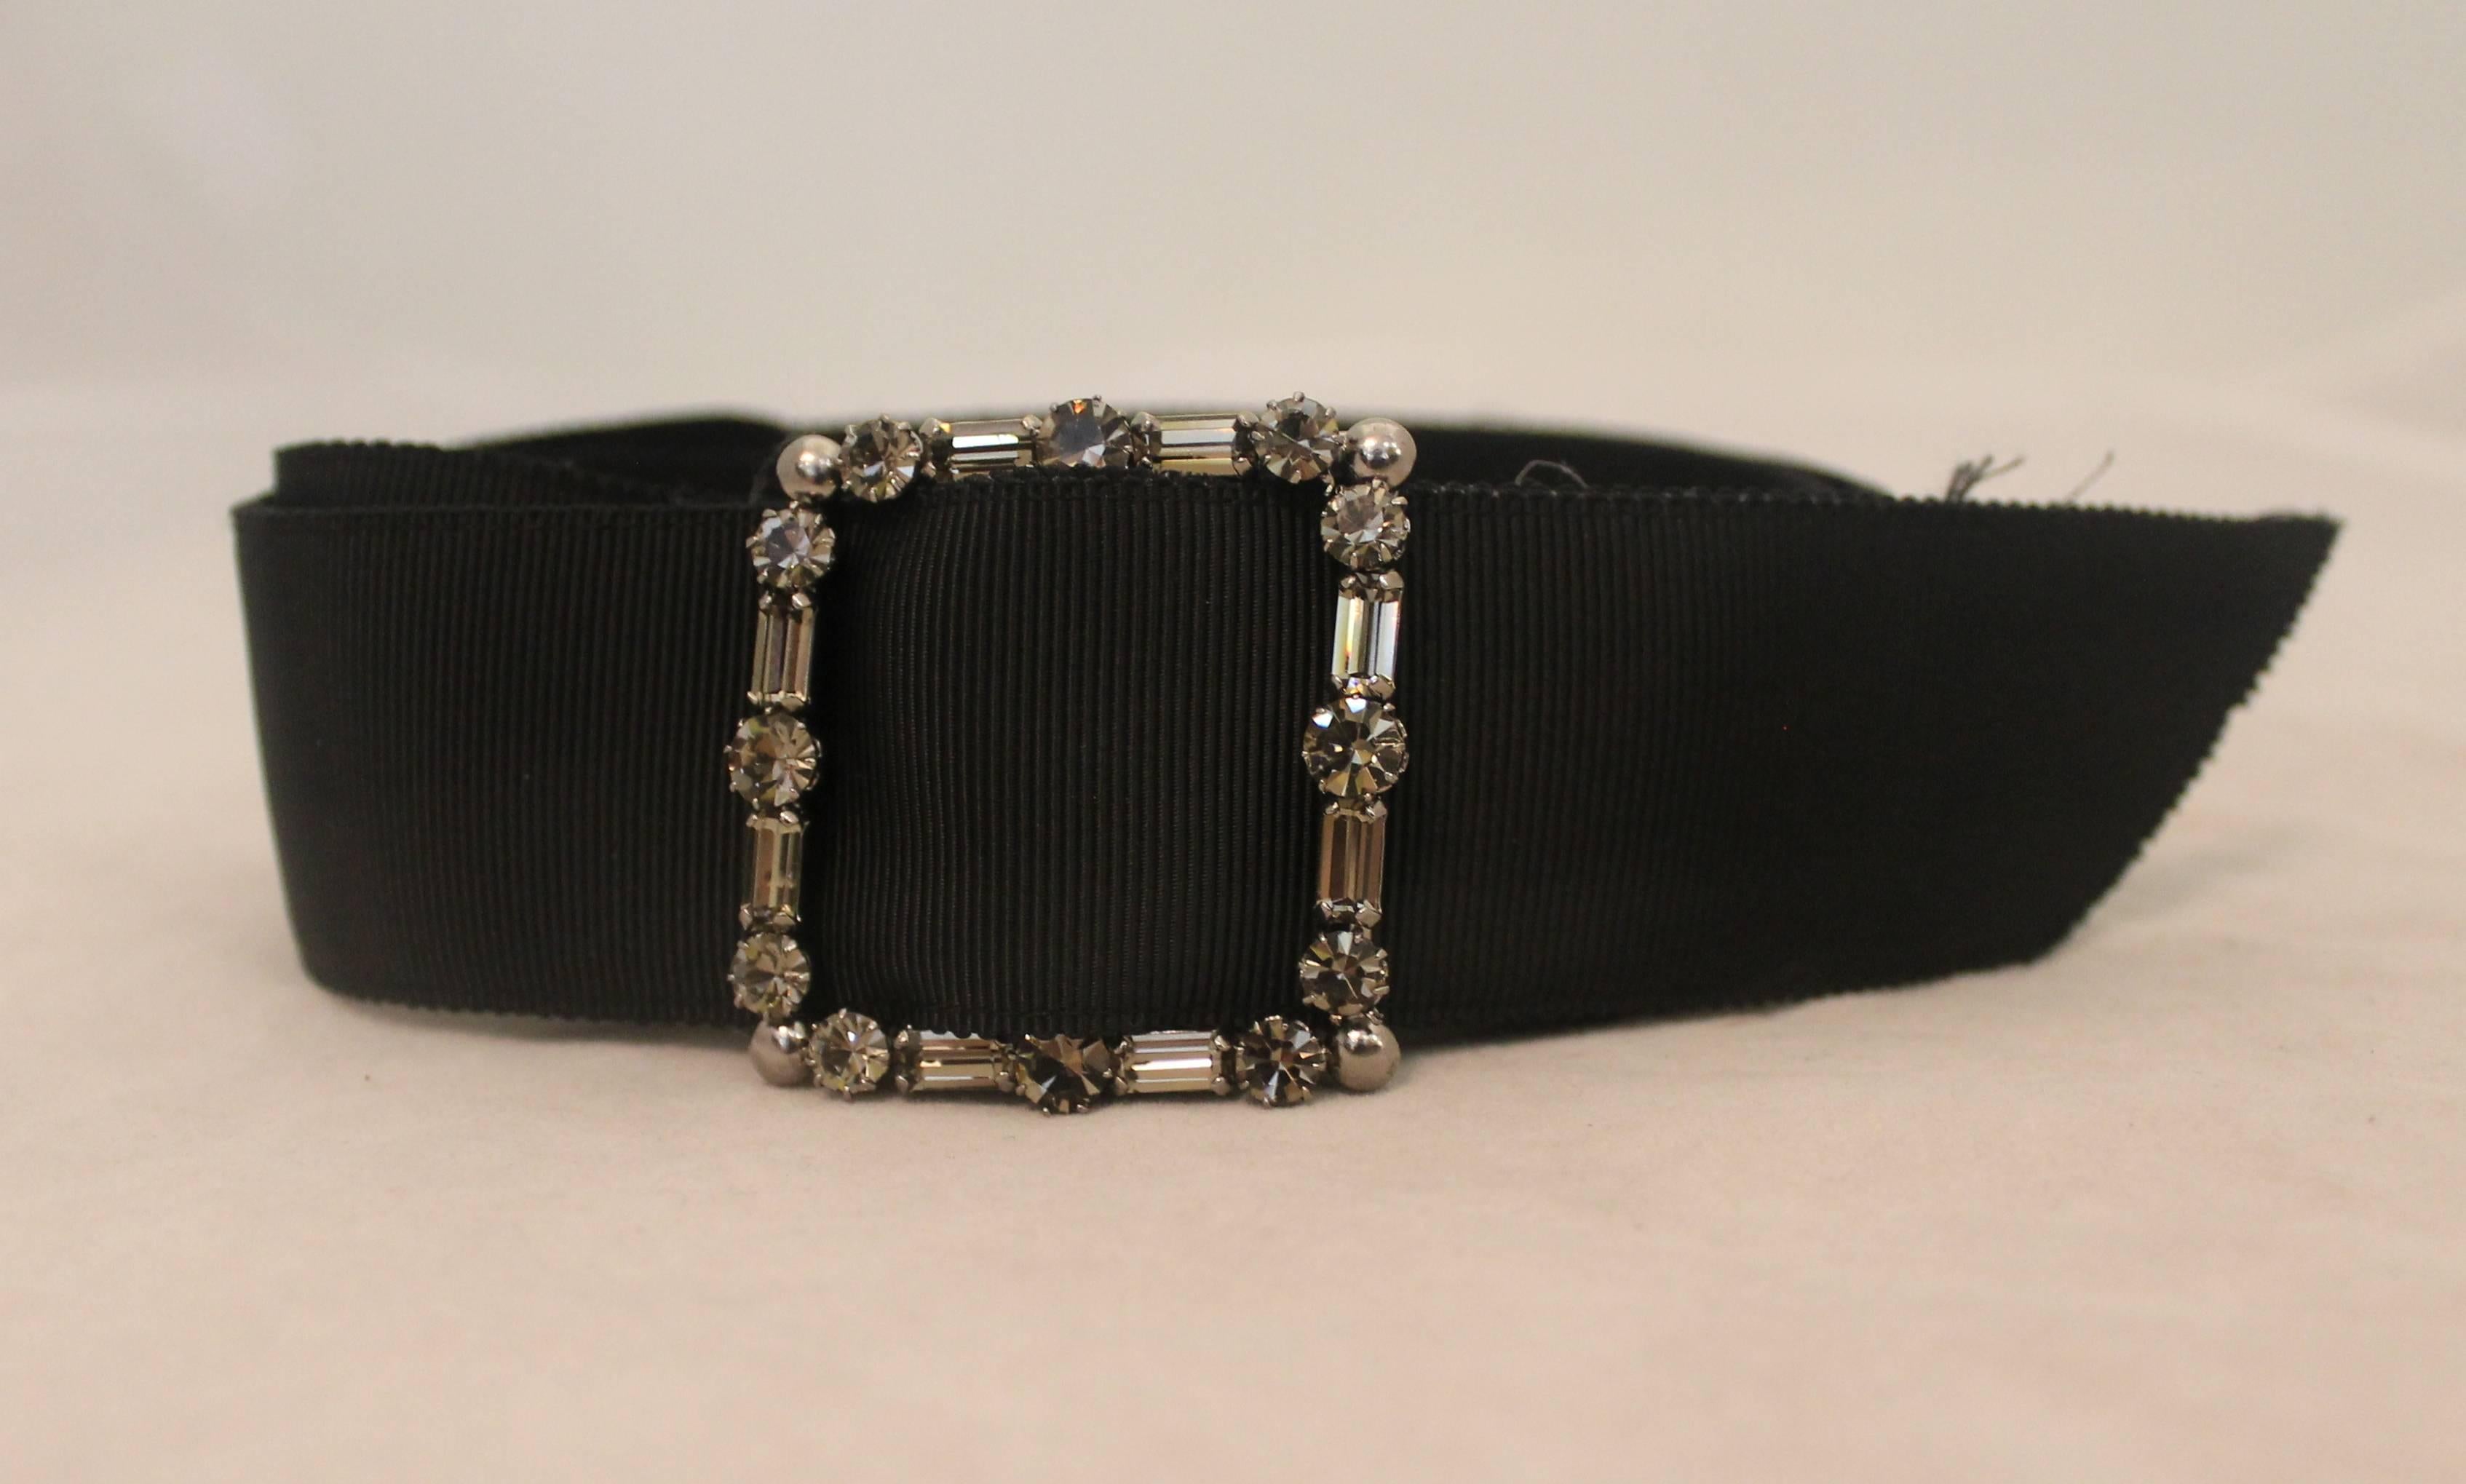 Lanvin Black Silk Faille Belt w/ Crystal Buckle - Circa 2006.  This lovely belt is in excellent condition.  It features an elegant black silk faille and a crystal buckle.  It is from the 2006 collection.

Measurements:
Belt:
-Length: